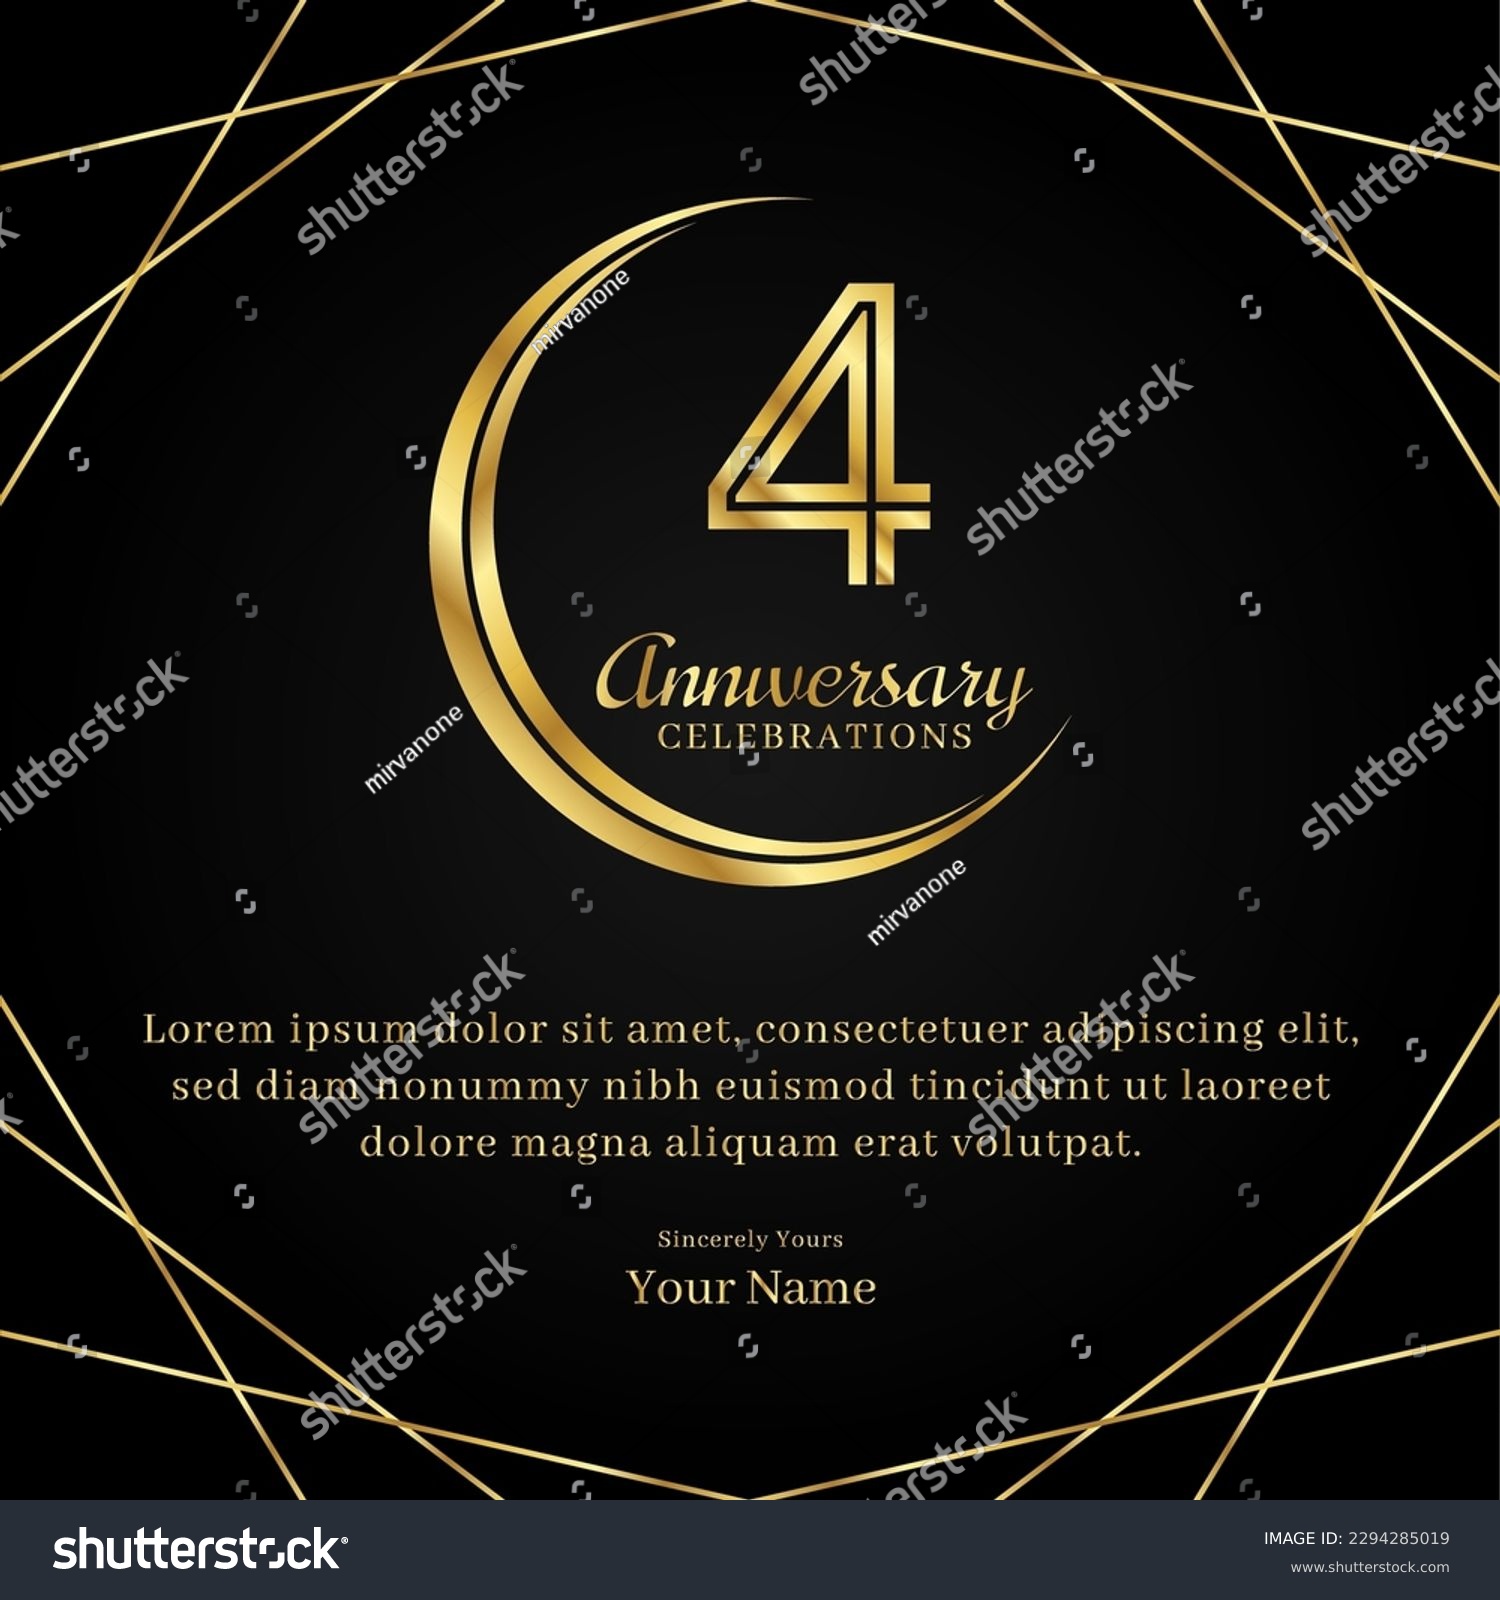 SVG of 4 years anniversary with a half moon design, double lines of gold color numbers, and text anniversary celebrations on a luxurious black and gold background svg